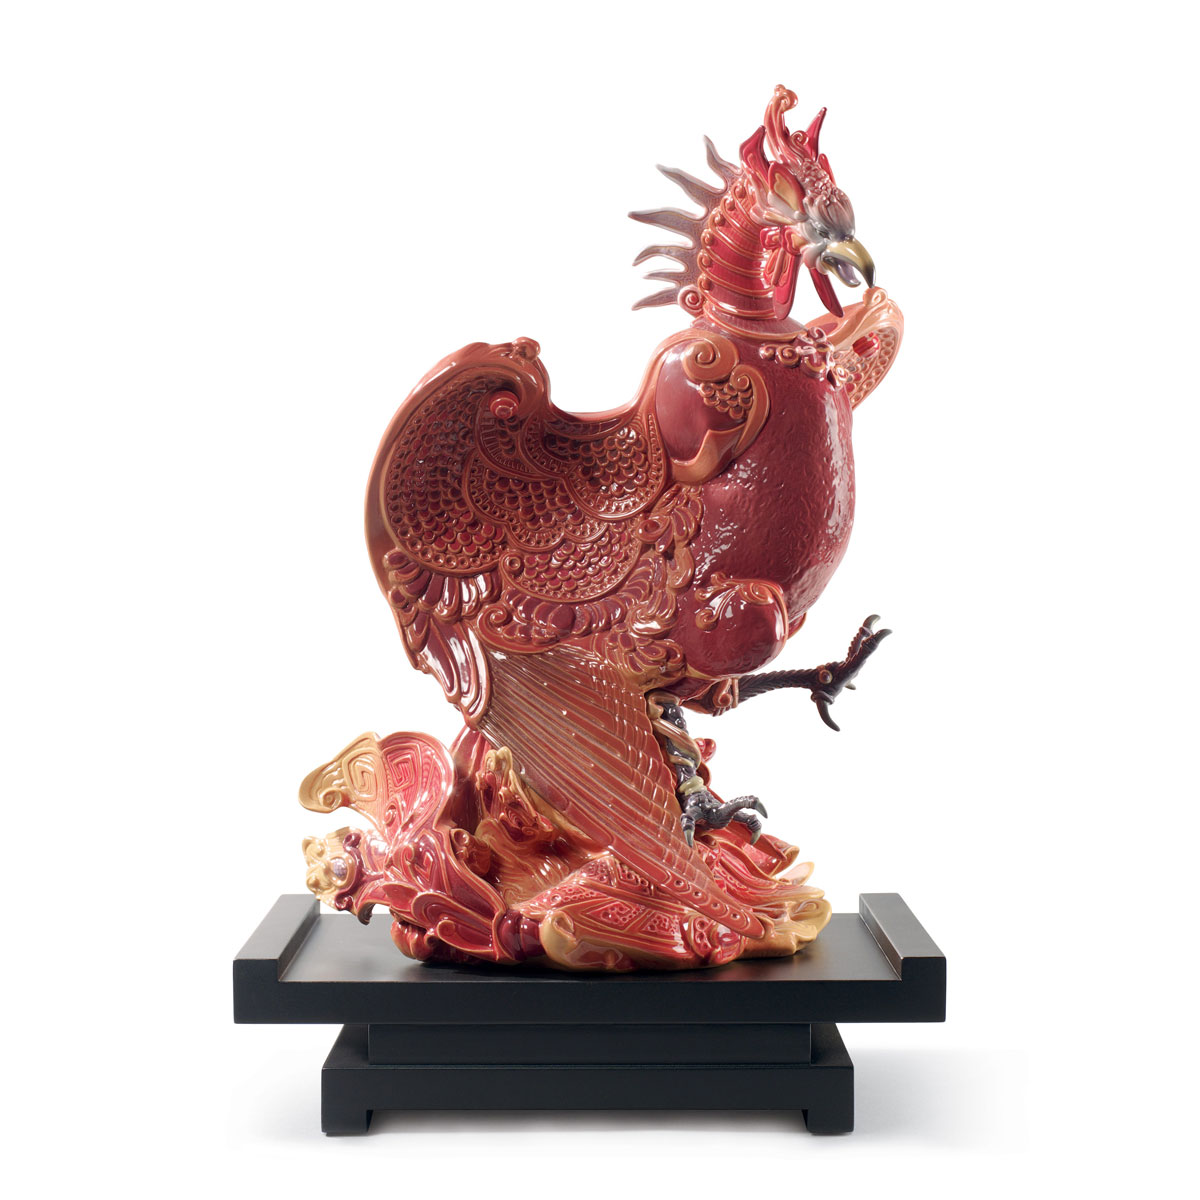 Lladro Classic Sculpture, Rise Of The Phoenix Sculpture. Limited Edition